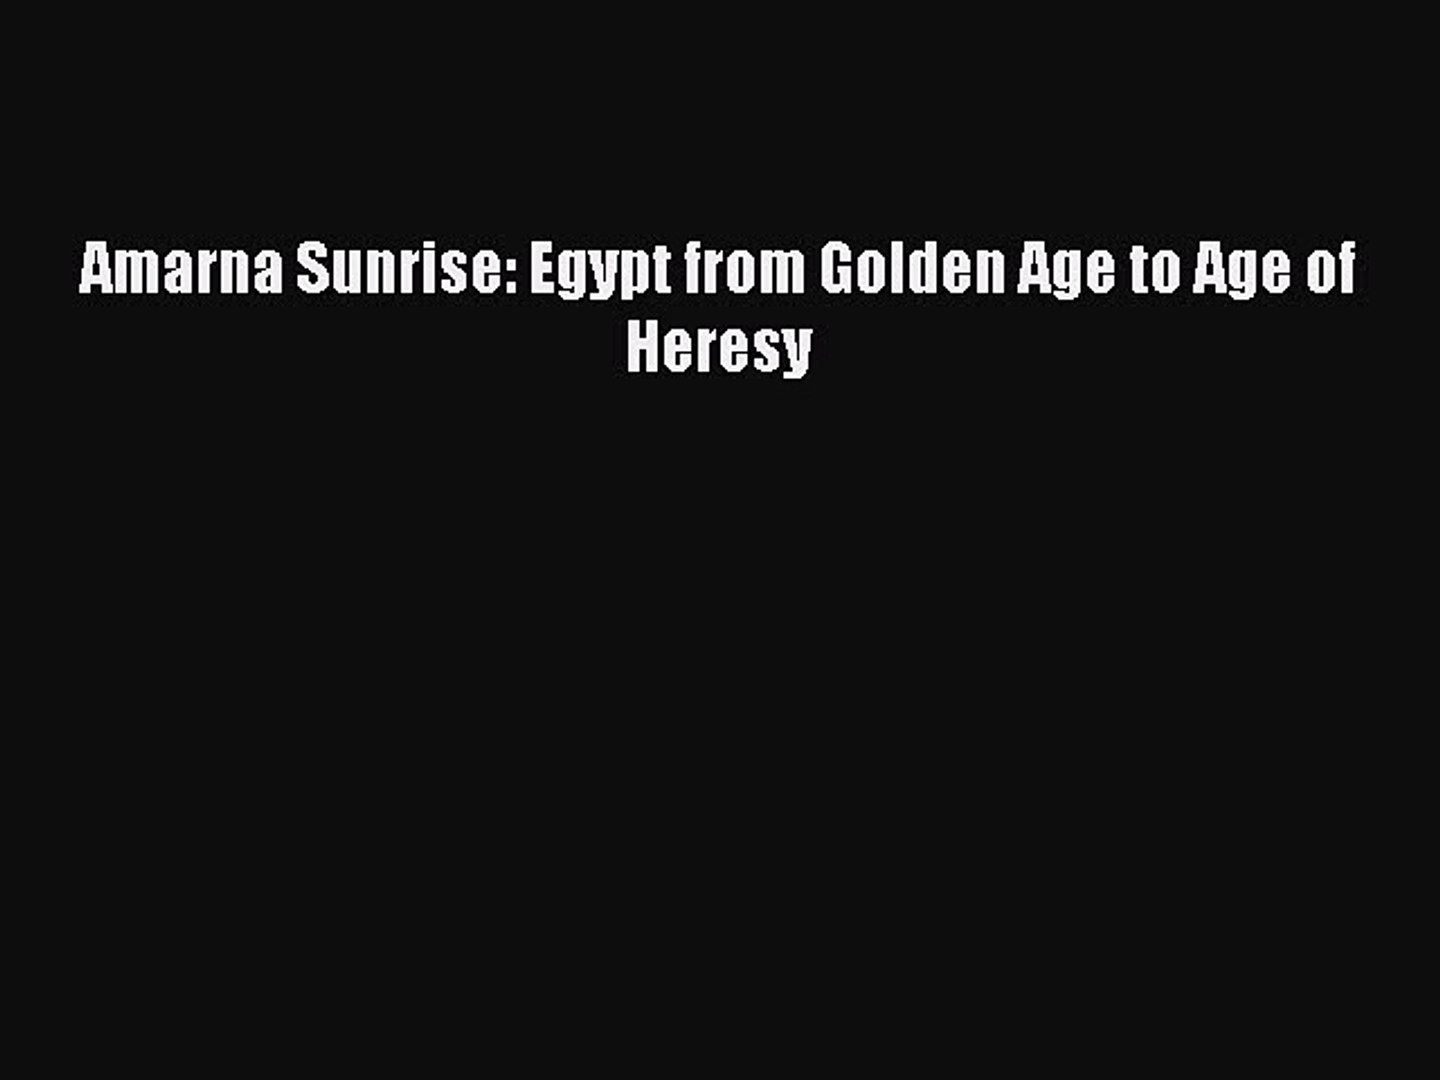 Egypt from Golden Age to Age of Heresy Amarna Sunrise